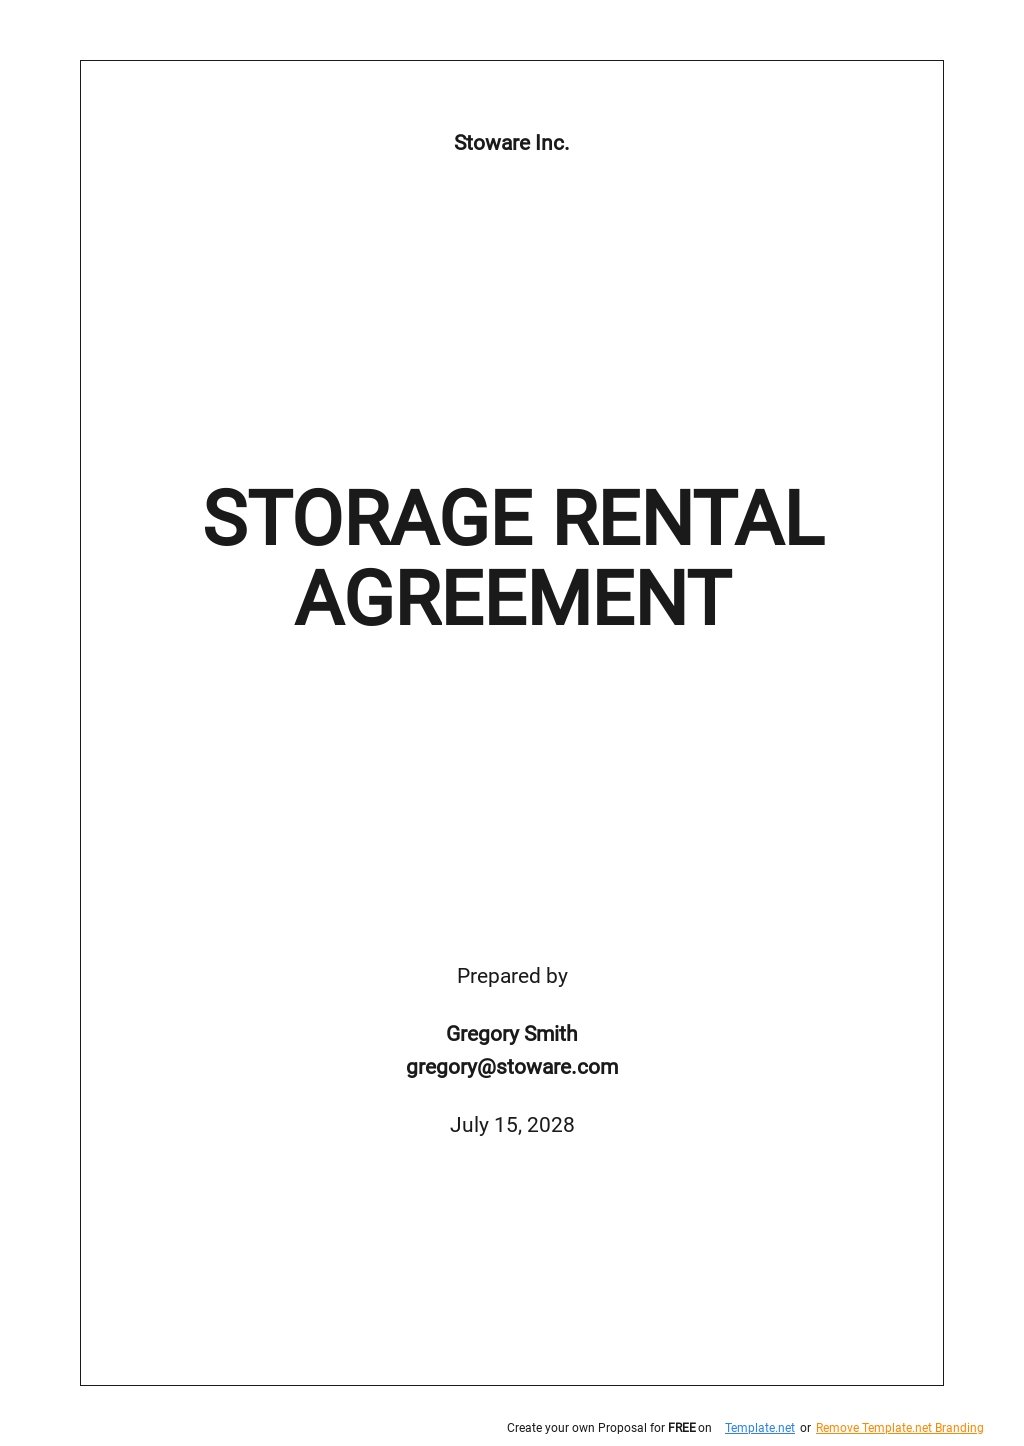 Storage Rental Agreement Template Google Docs, Word, Apple Pages